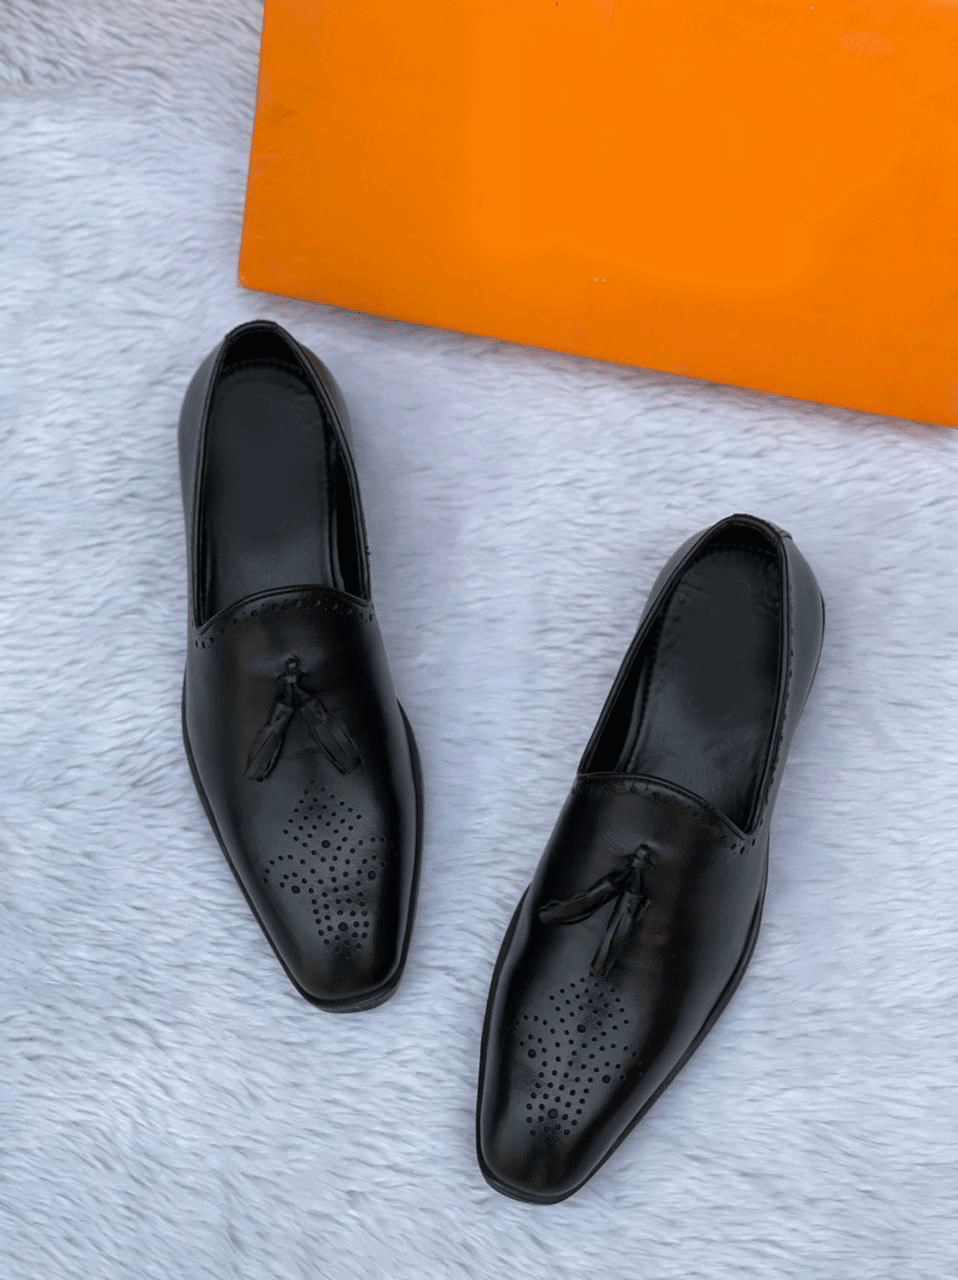 Premium Quality Tassel Mocassins Leather Formal Shoes For Men-Unique And Classy